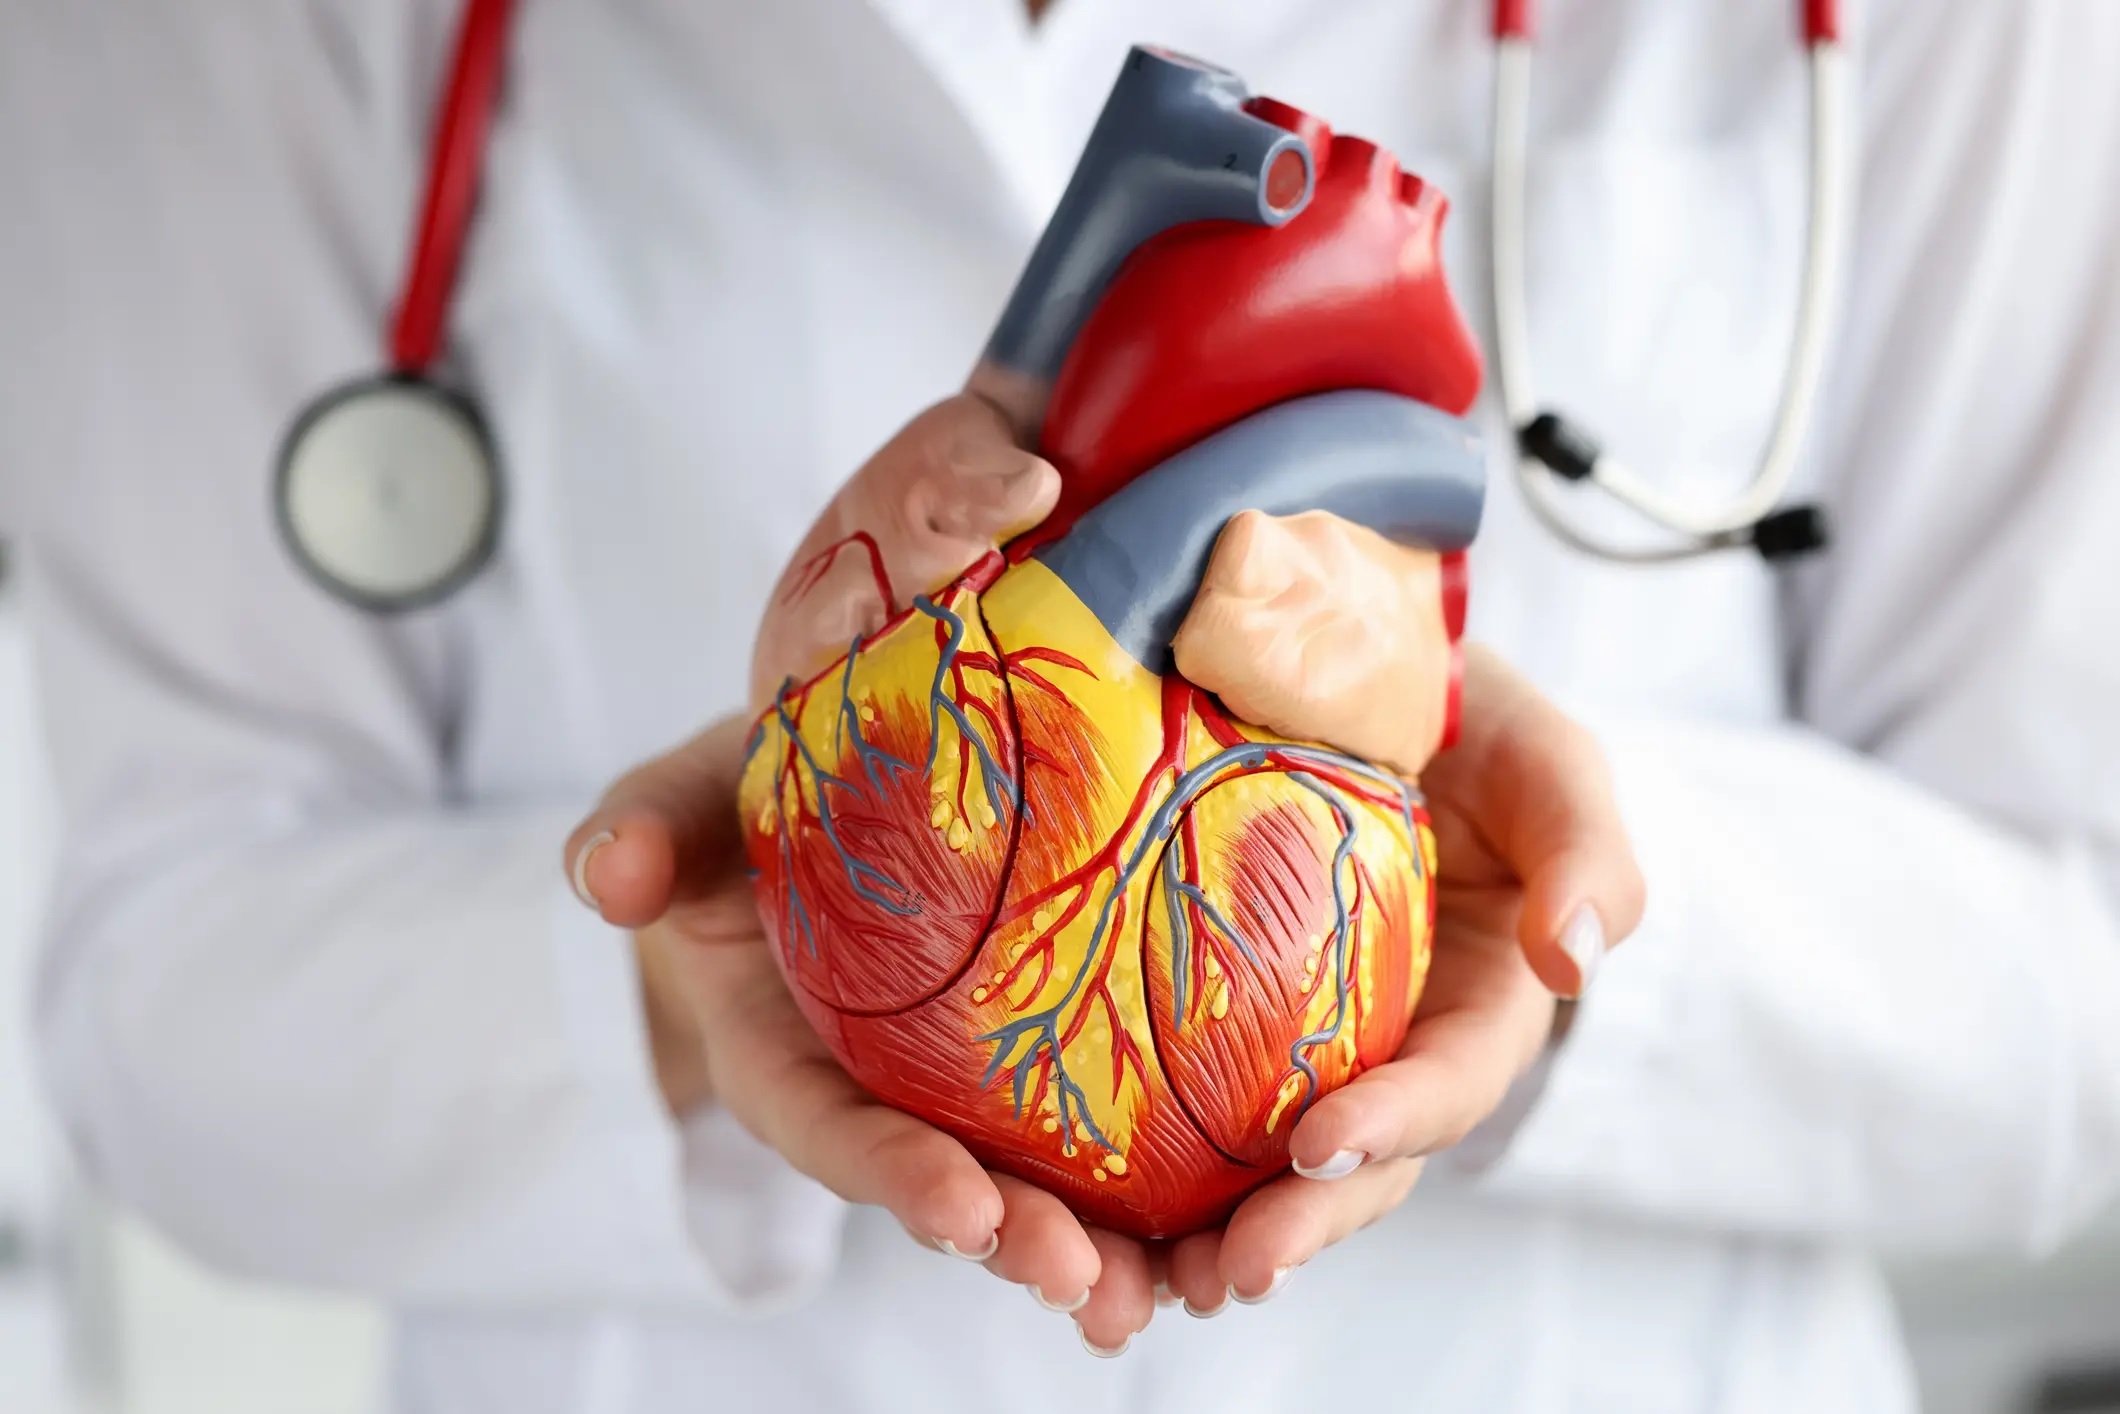 Multi-institutional project awarded $31M to study promising heart failure therapy